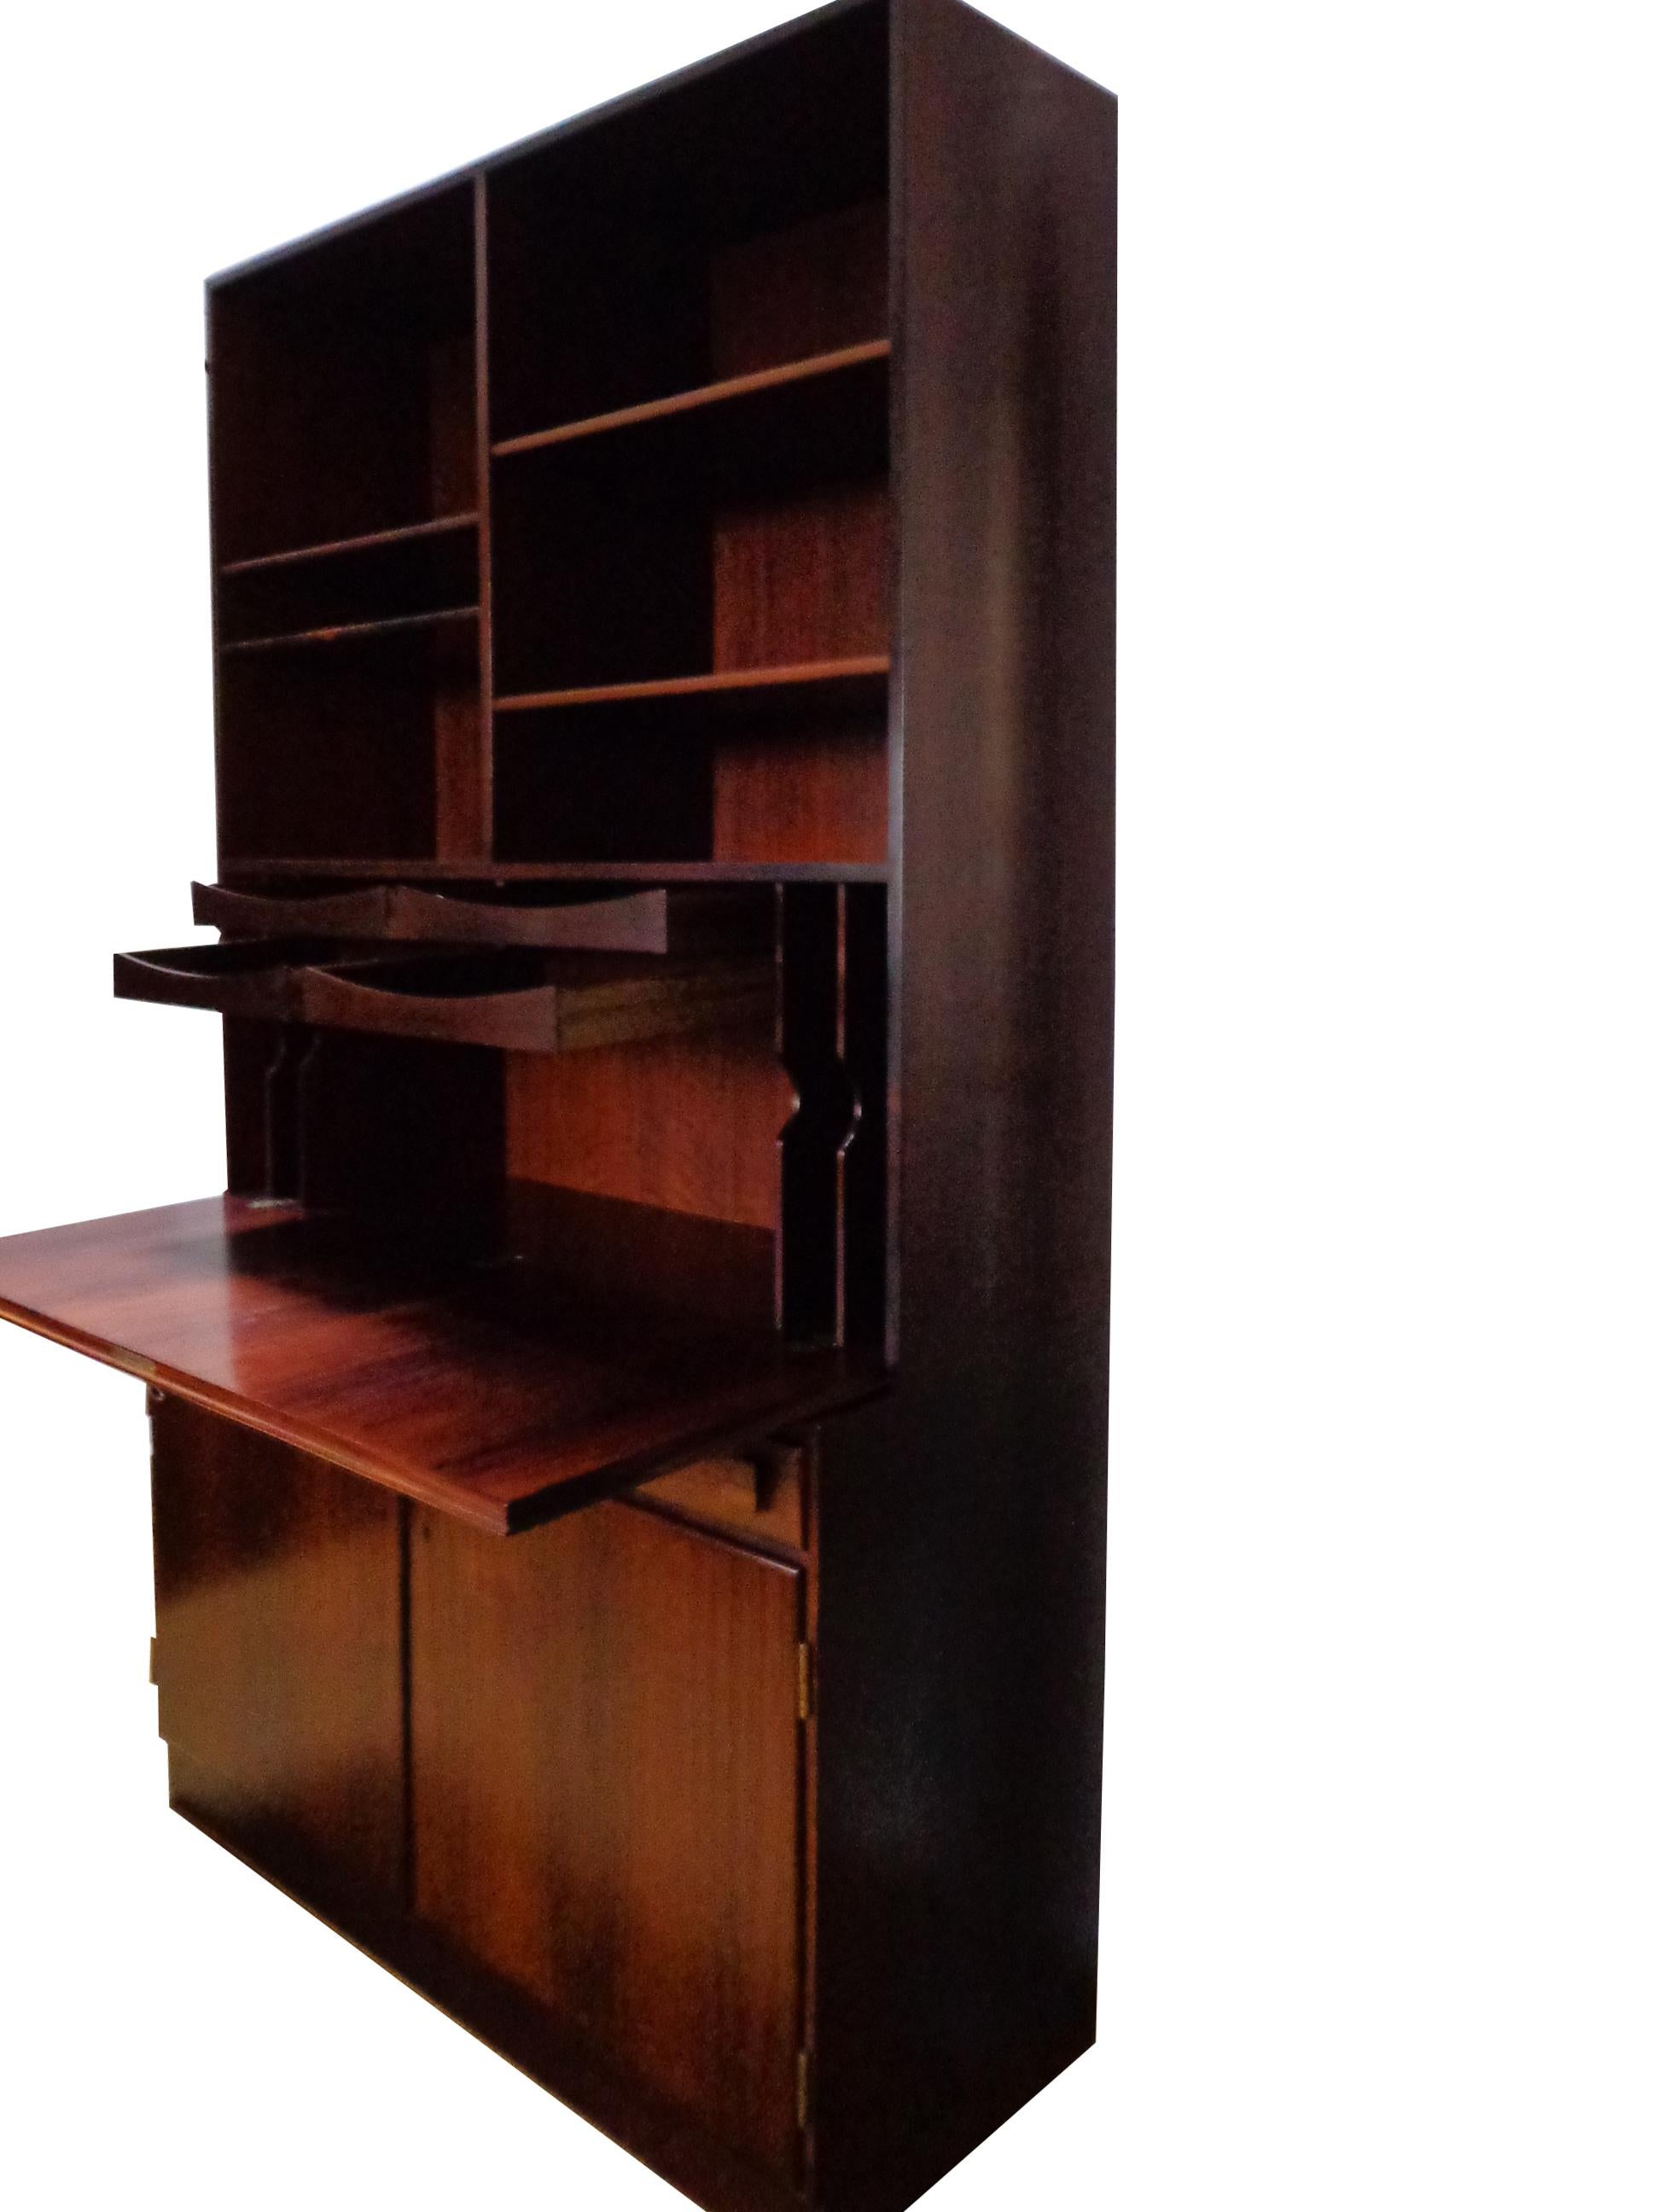 Offered by Zitzo, Amsterdam: Wall unit of rosewood designed by Takashi Okamura and Erik Marquardsen, consisting base cabinet with doors and shelves inside. Top cabinet with pullout trays, shelves and drop leaf-desk. Original keys